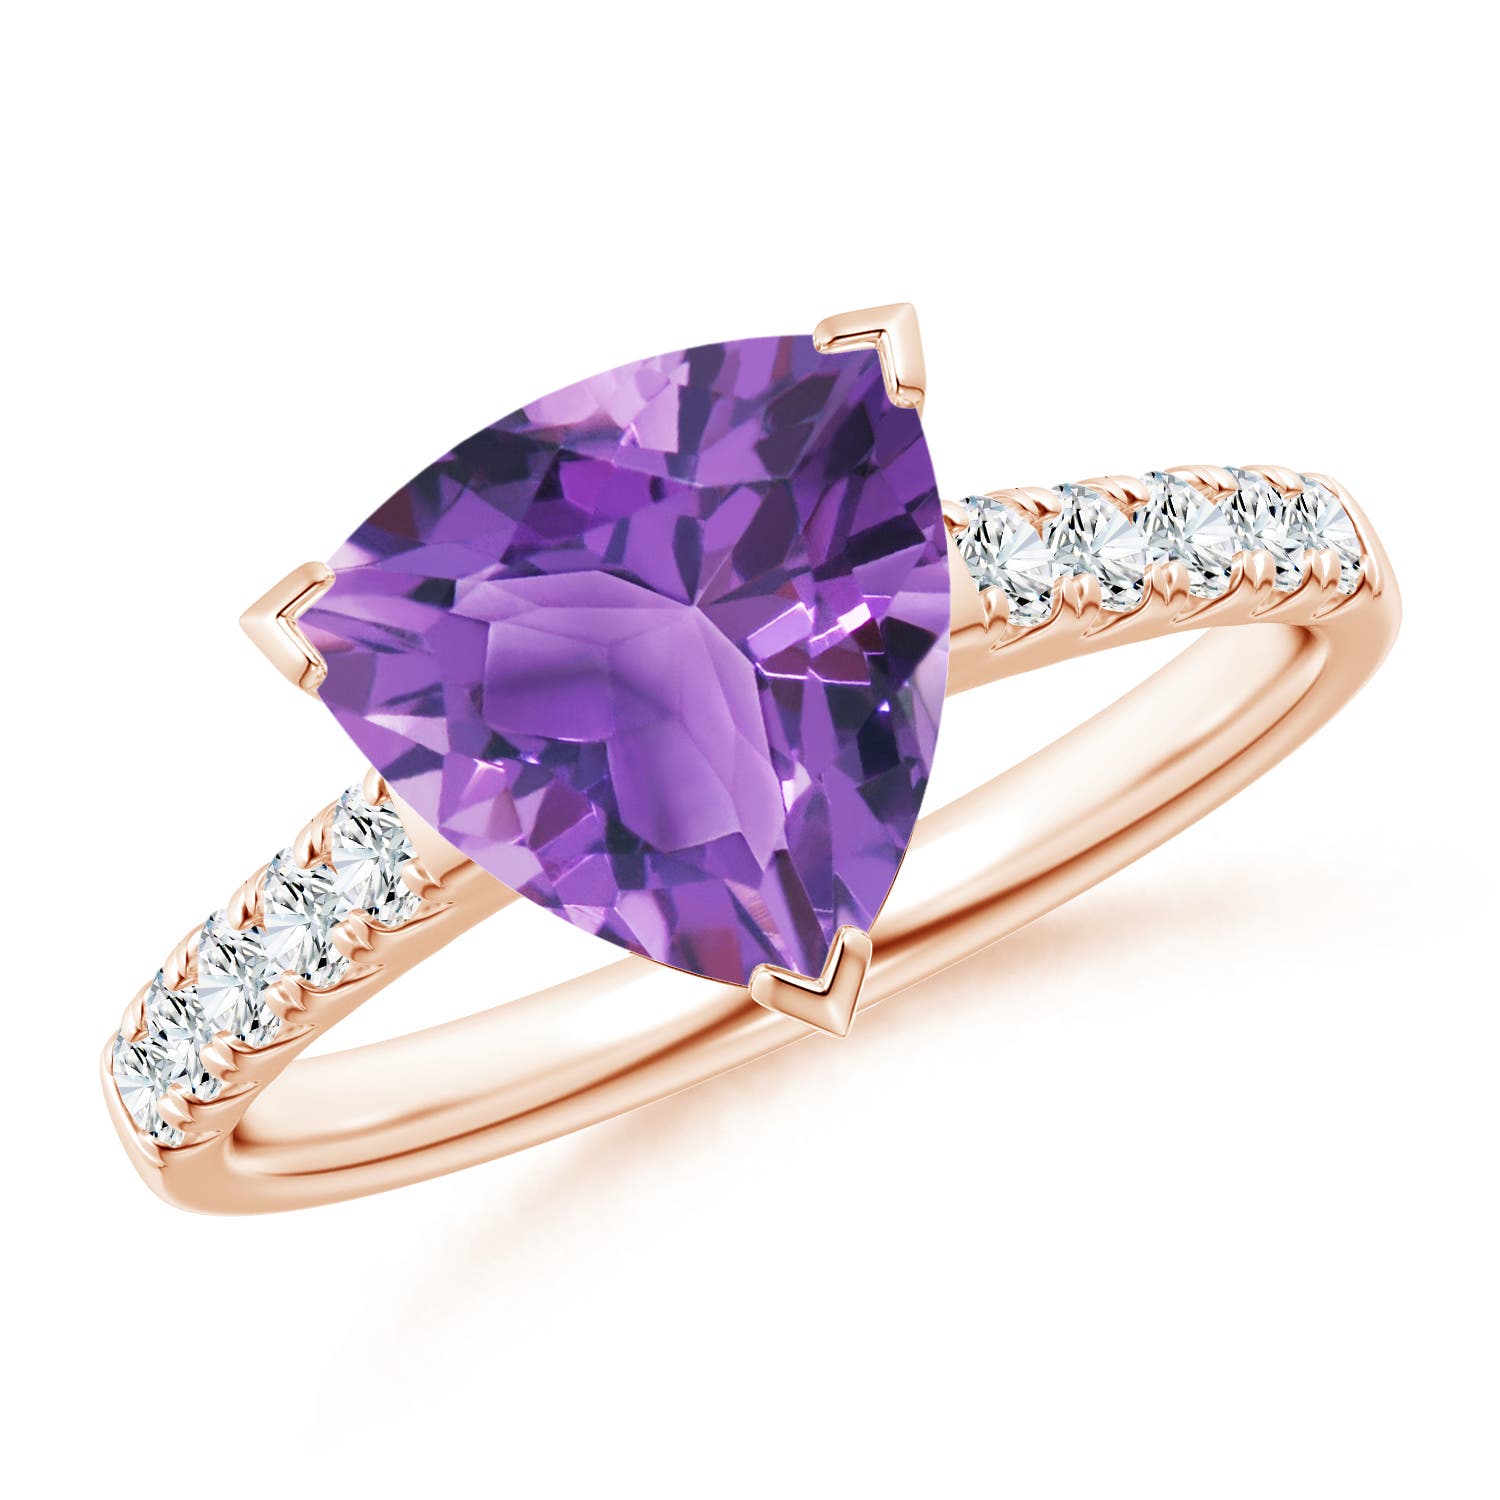 AA - Amethyst / 2.53 CT / 14 KT Rose Gold